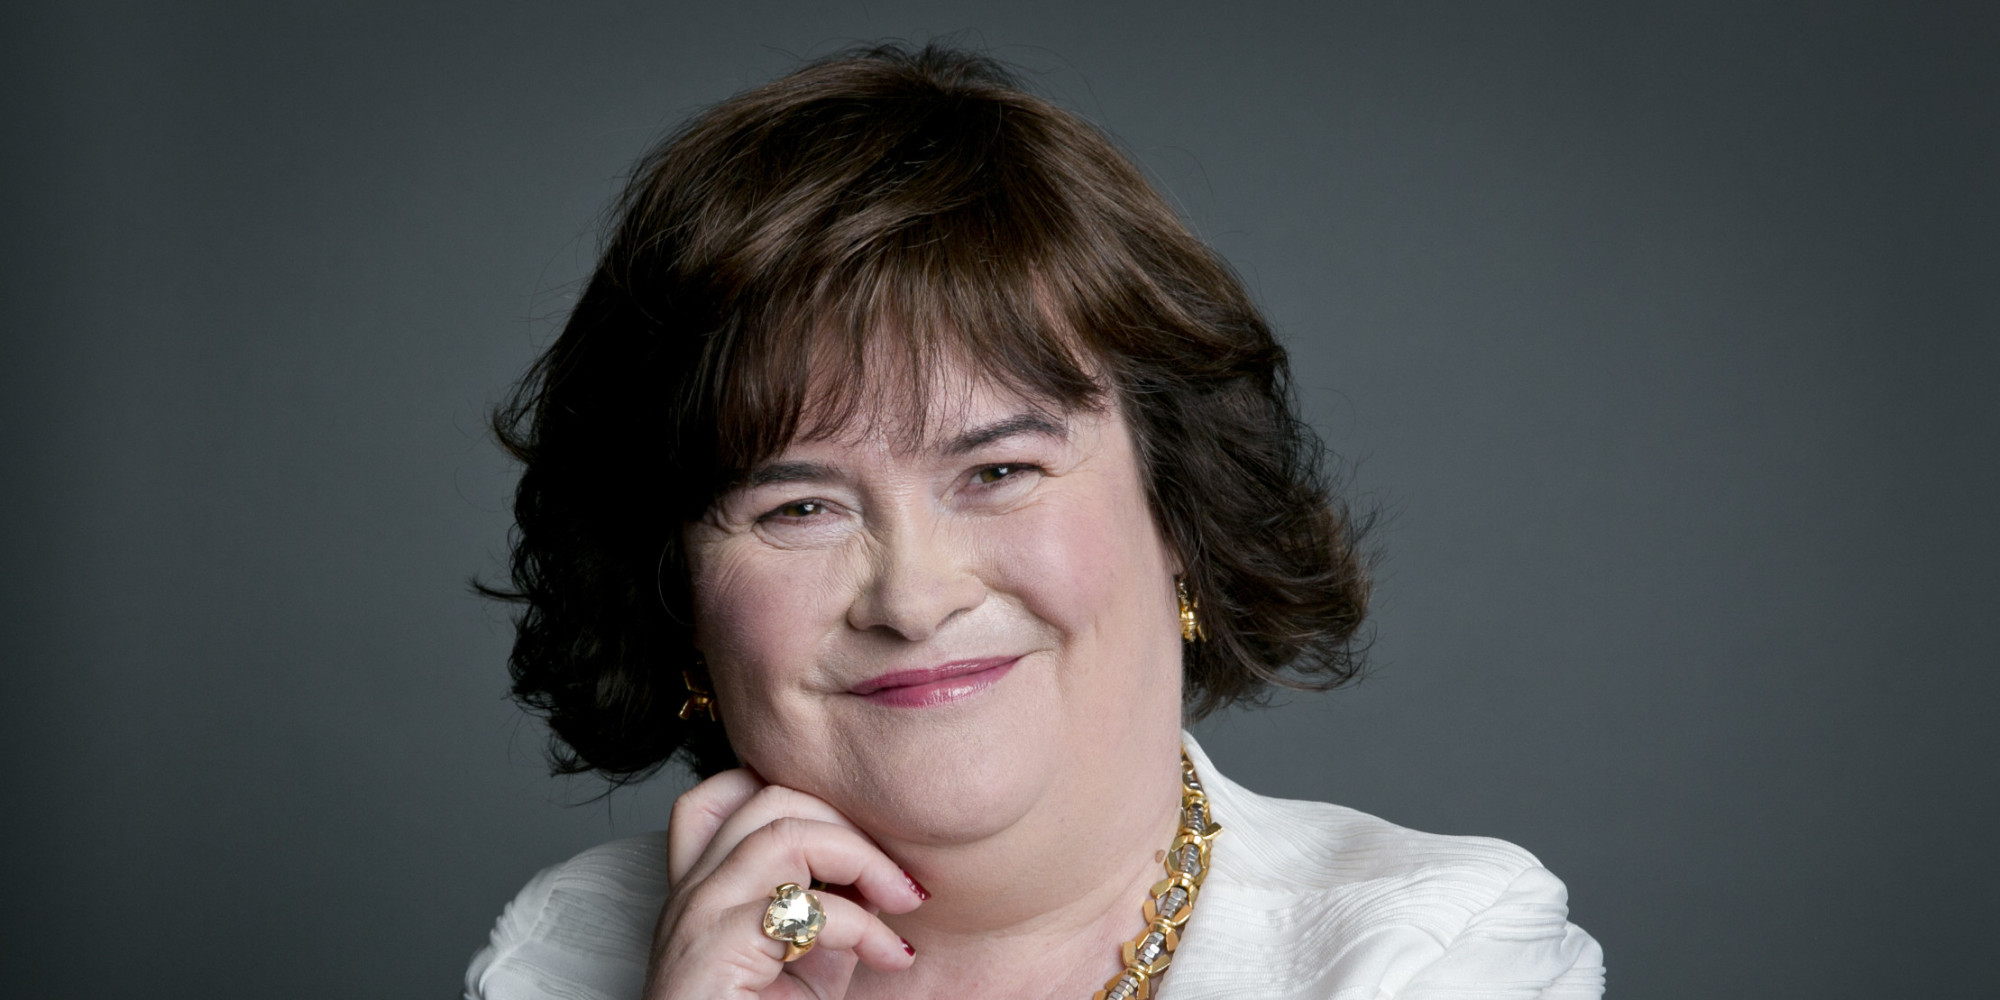 Susan Boyle Questioned By Police After Family Argument With Relative